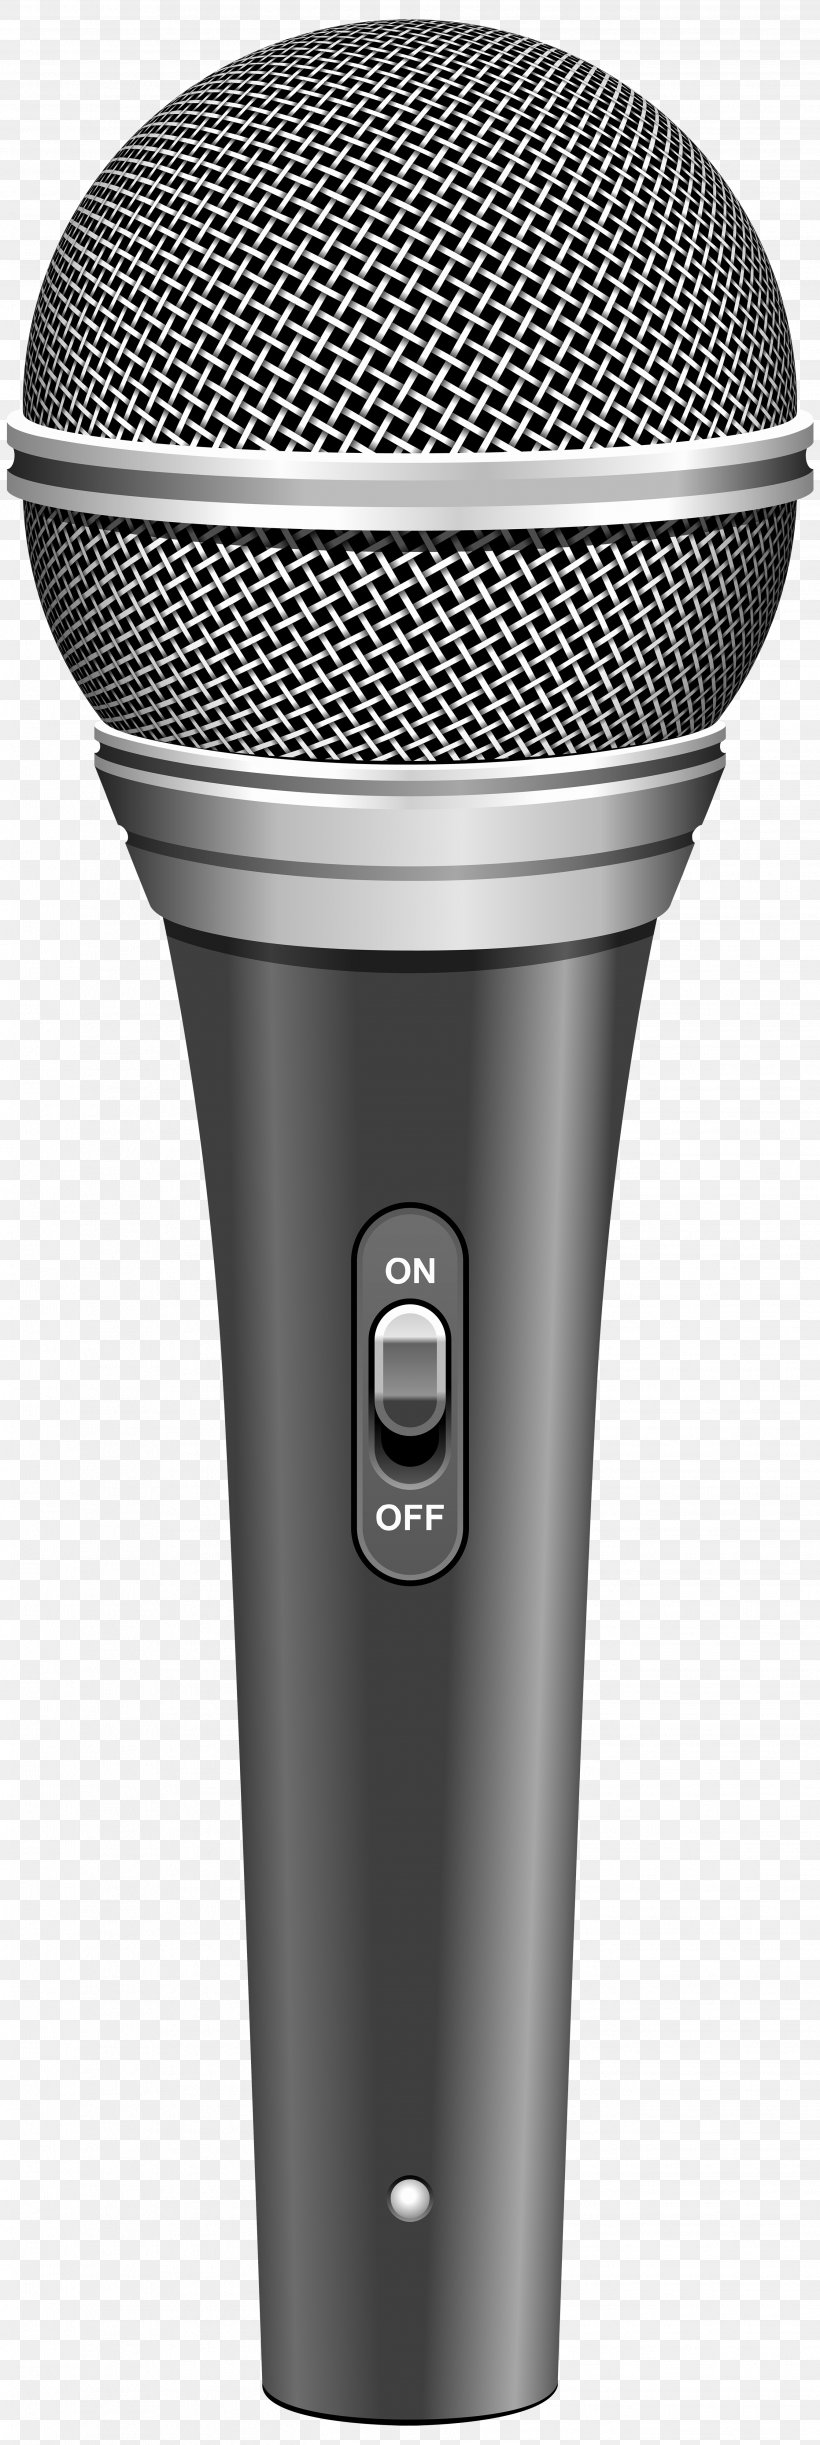 Microphone Clip Art, PNG, 2682x8000px, Microphone, Audio, Audio Equipment, Photography, Technology Download Free